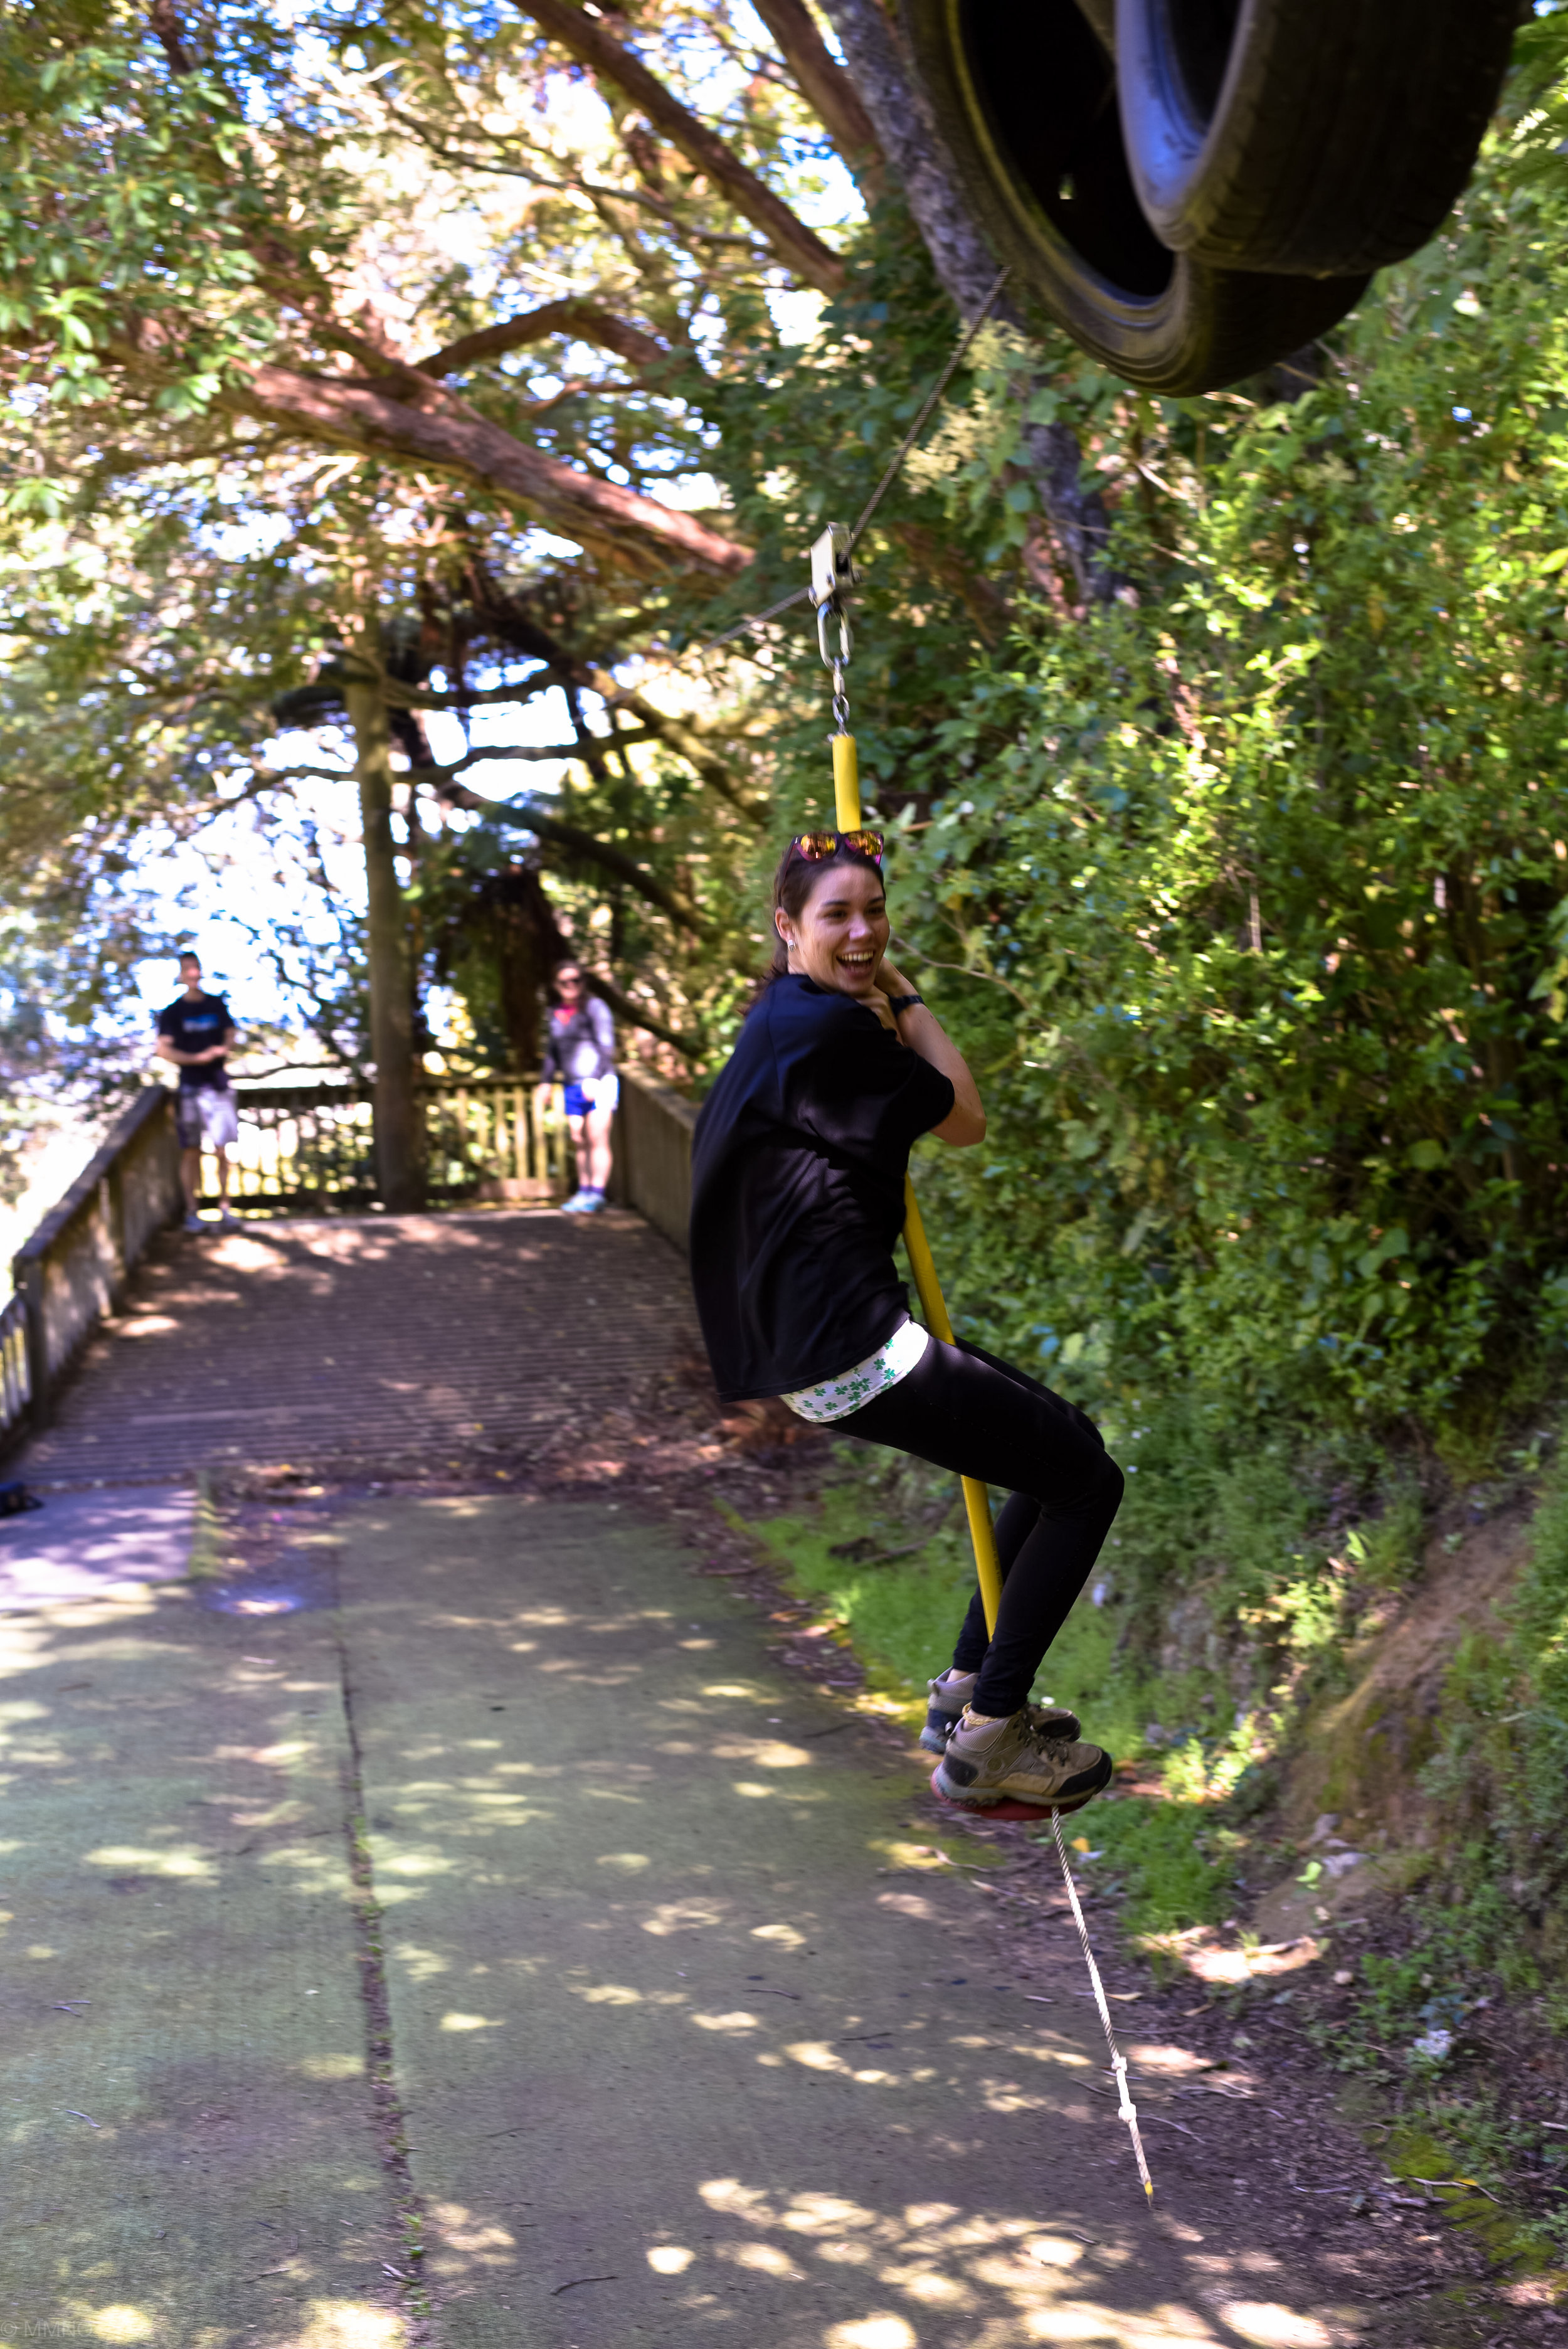   Brigid, rebel without a cause! Standing on the flying fox despite explicitly being told she can't!&nbsp;  